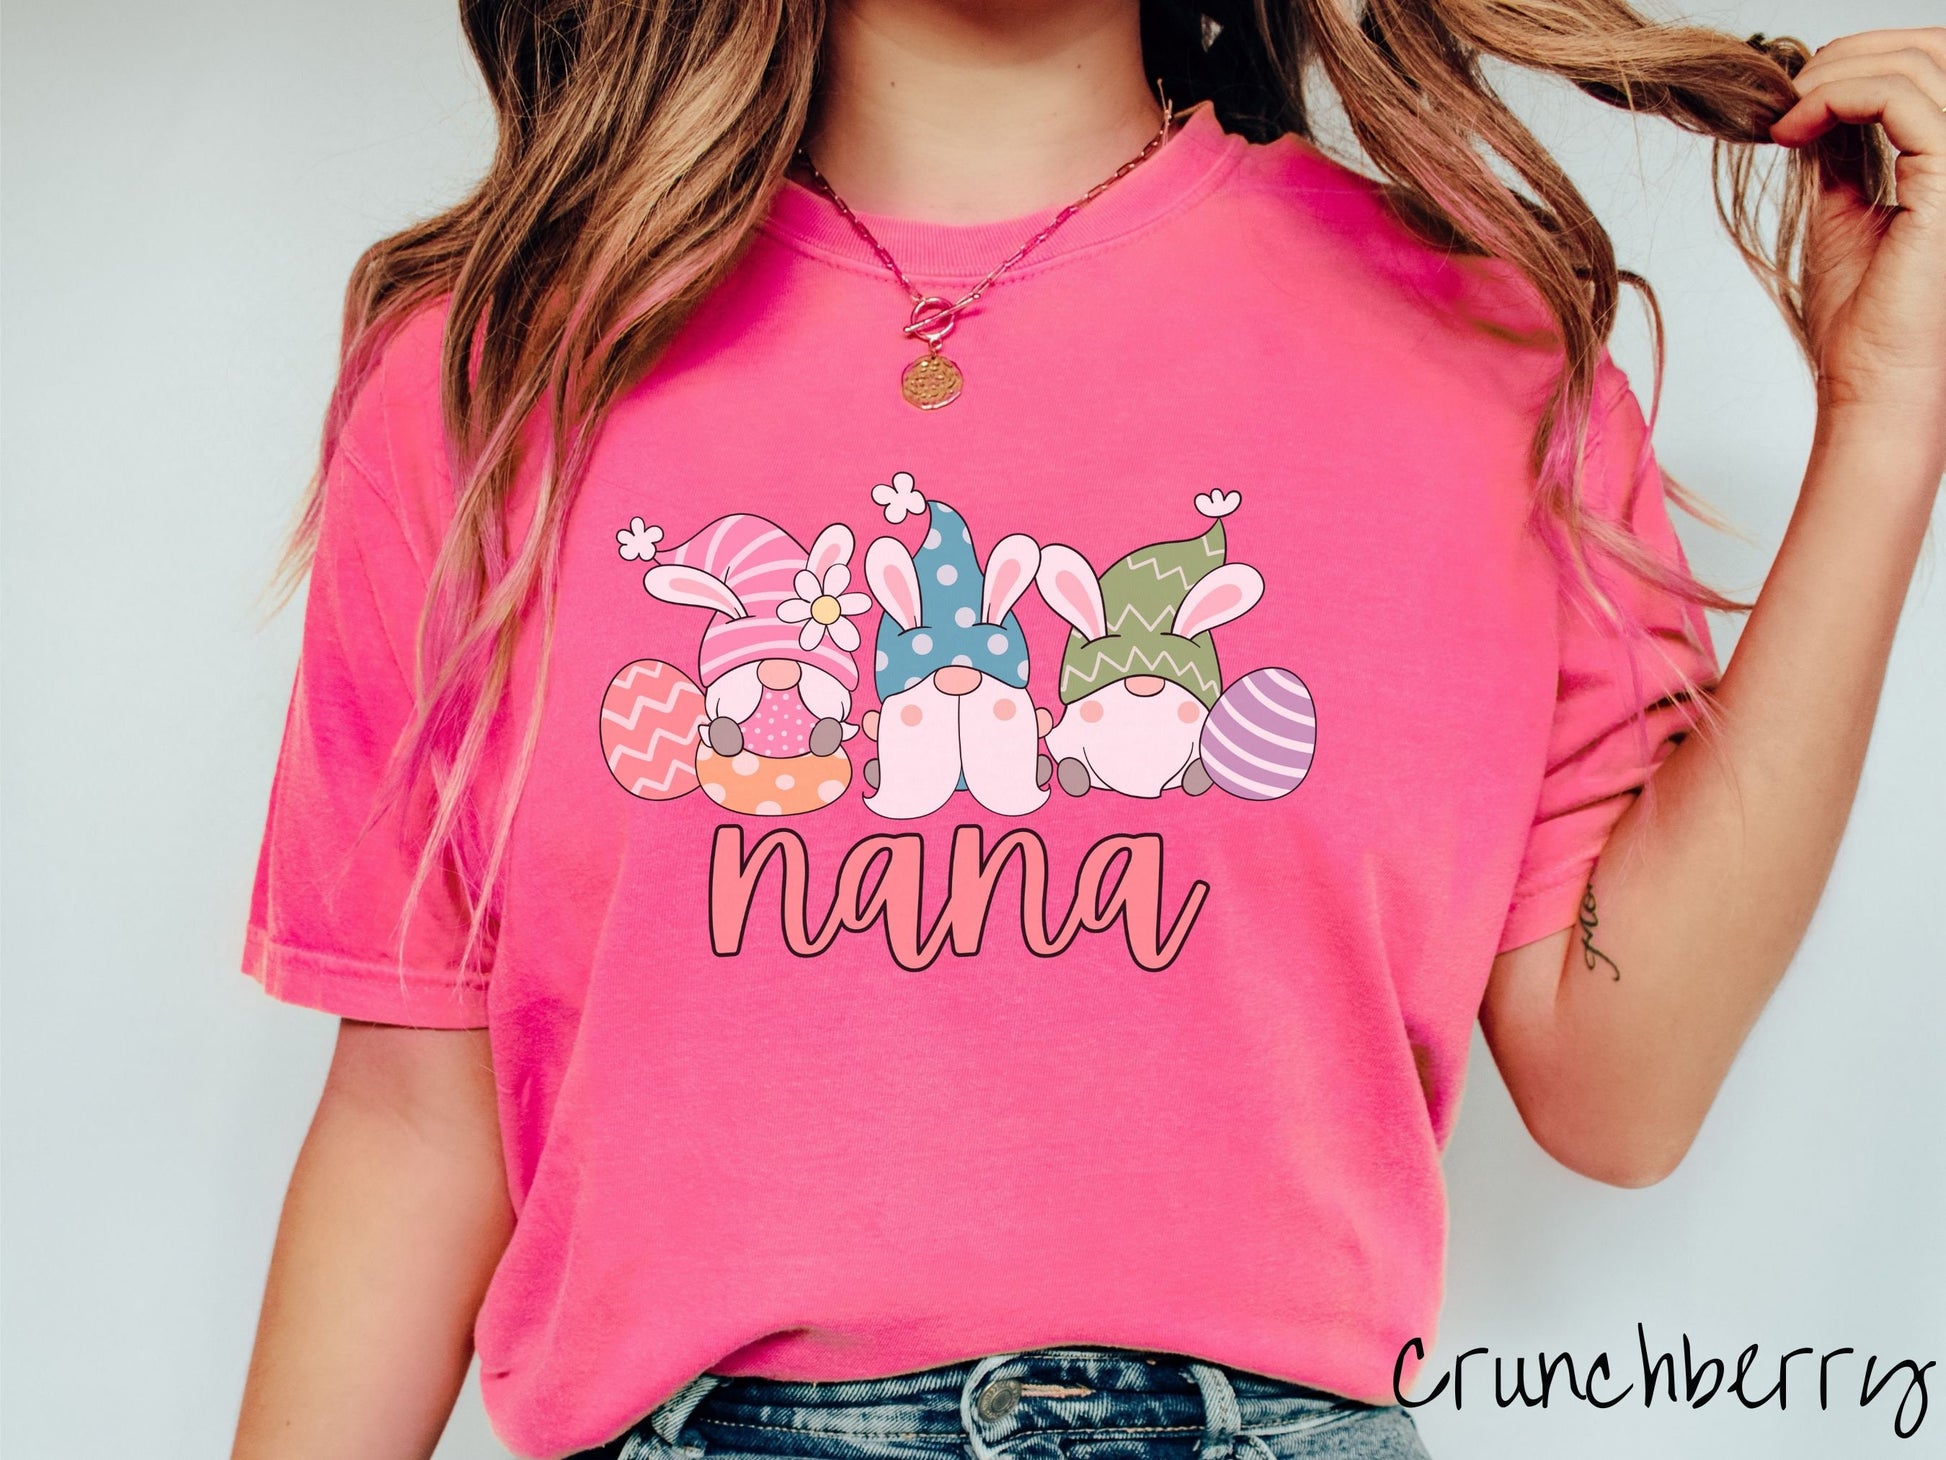 A woman wearing a cute, vintage crunchberry colored shirt with text Nana below three gnomes with rabbit ears sitting next to each other. The left one is wearing pink, the middle blue, and right in green, with colorful easter eggs scattered about.